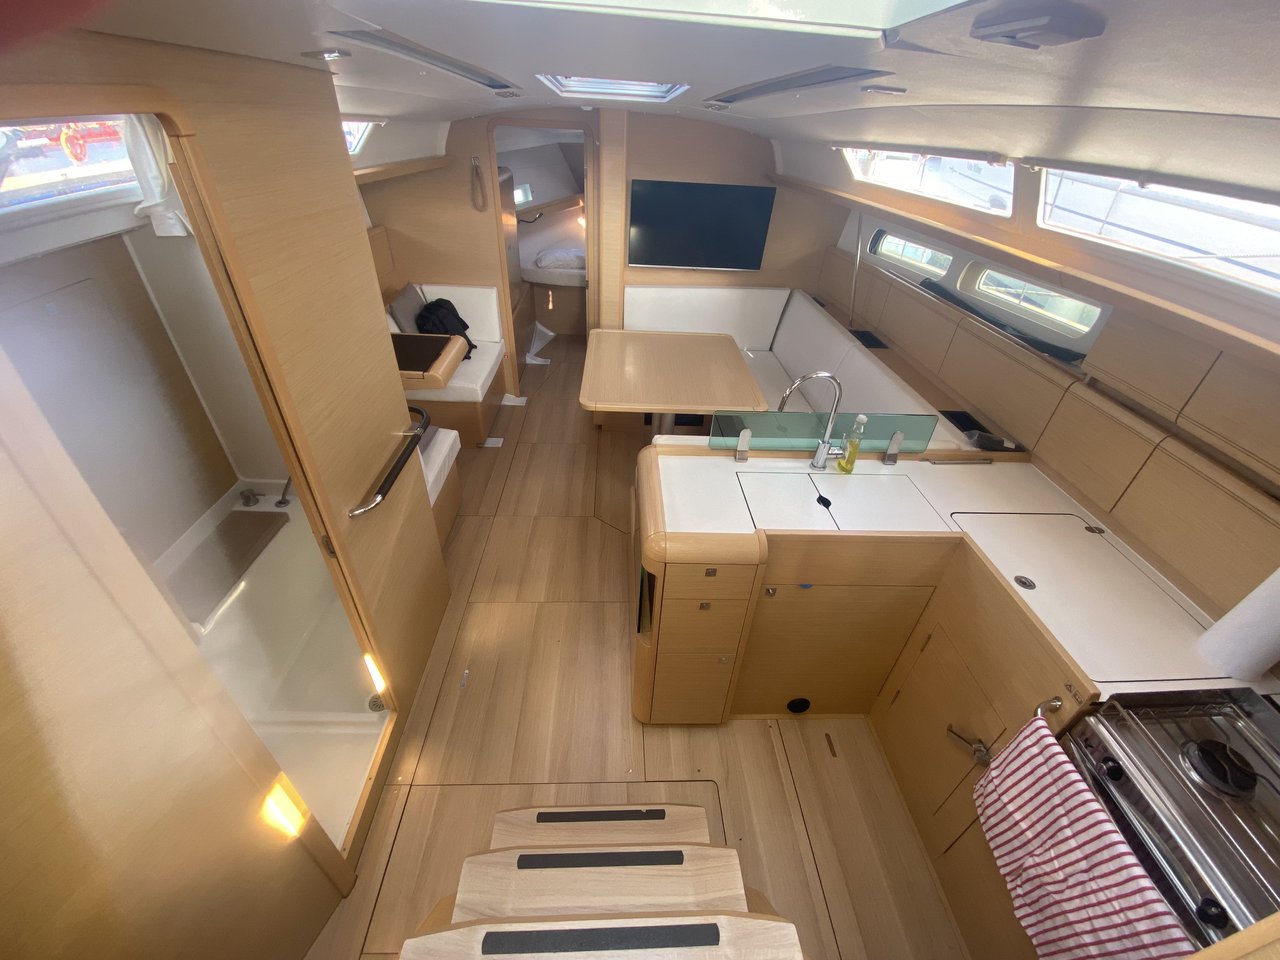 Sun Odyssey 419 - Yacht Charter United Kingdom & Boat hire in United Kingdom Scotland Firth of Clyde Largs Largs Yacht Haven 3